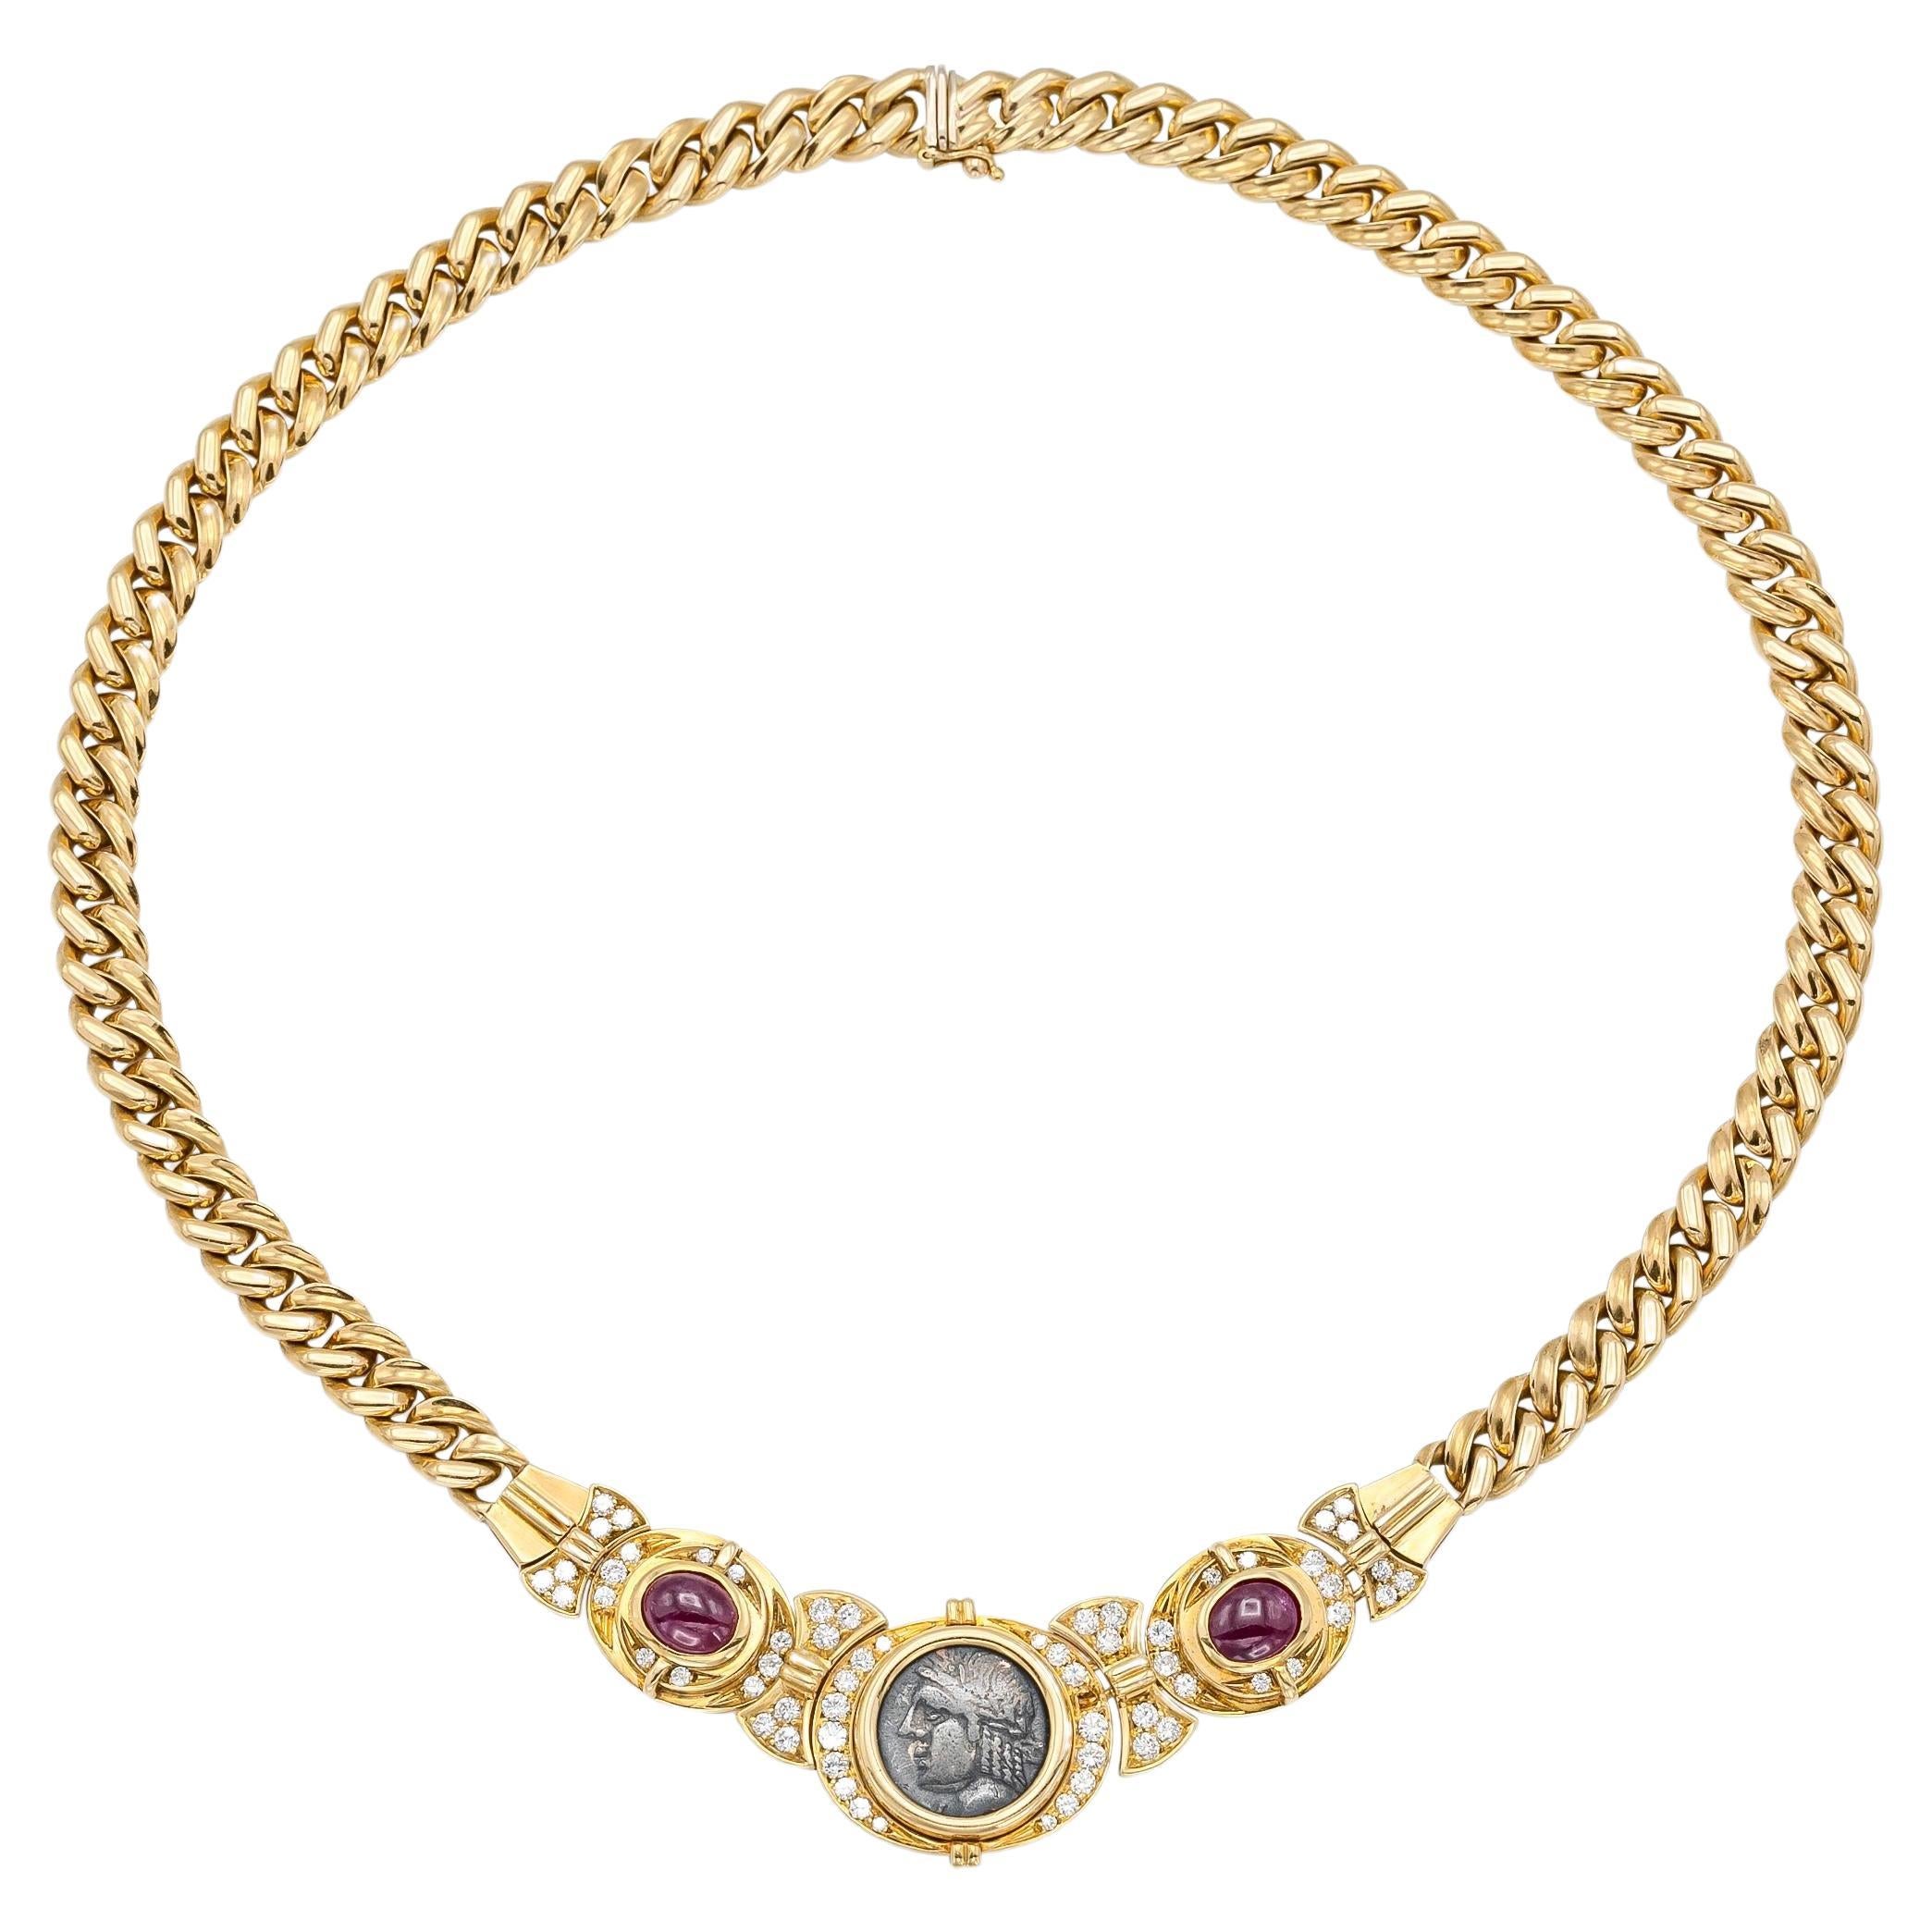 Vintage 1970s Bvlgari Monete Roman Coin Necklace with Rubies and Diamonds For Sale